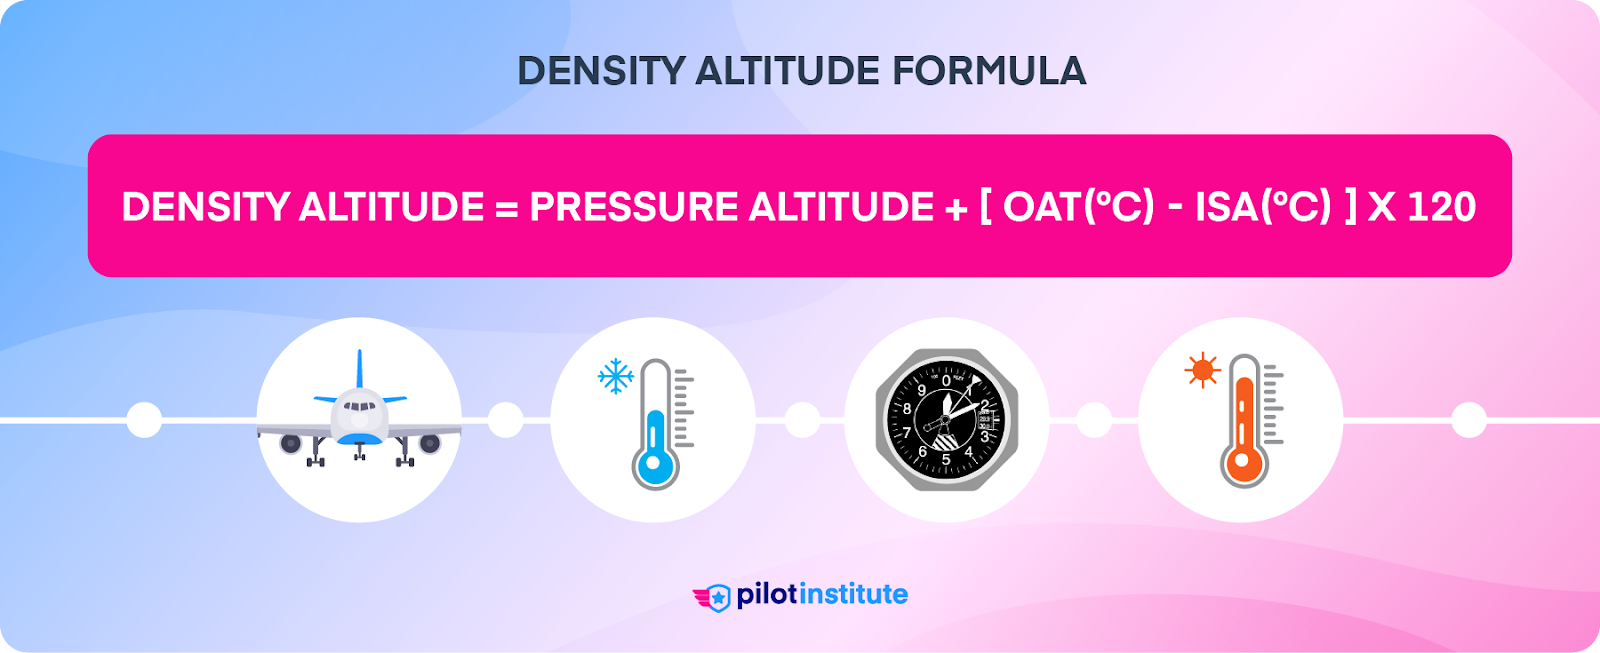 The density altitude equation.